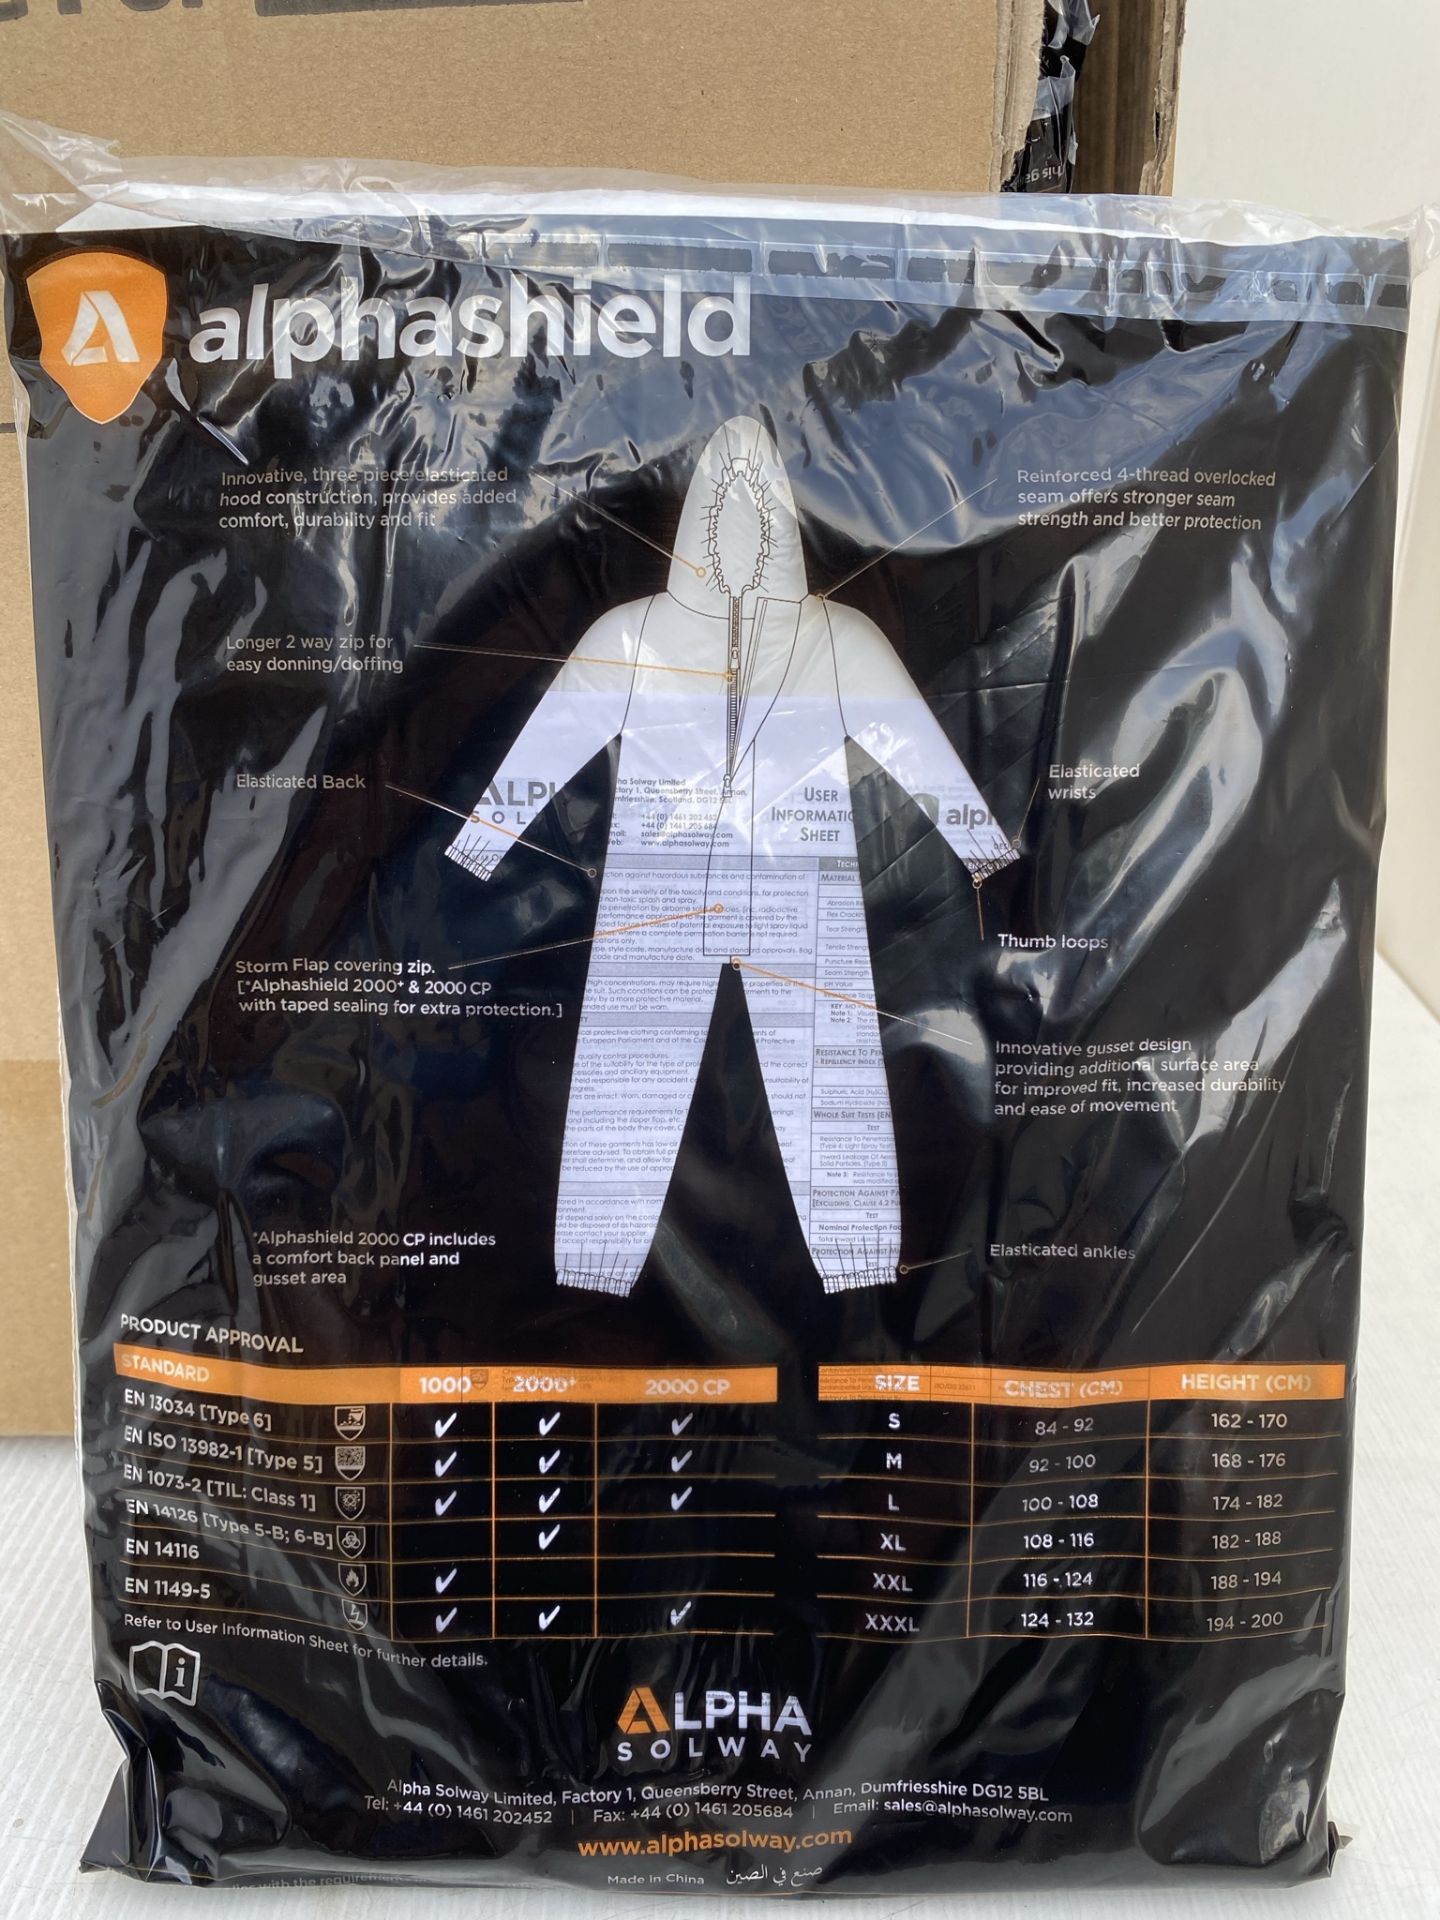 50 x Alpha Solway - Alphashield 2000+ protective S2BH+ white oversuits - Assorted sizes, - Image 3 of 3